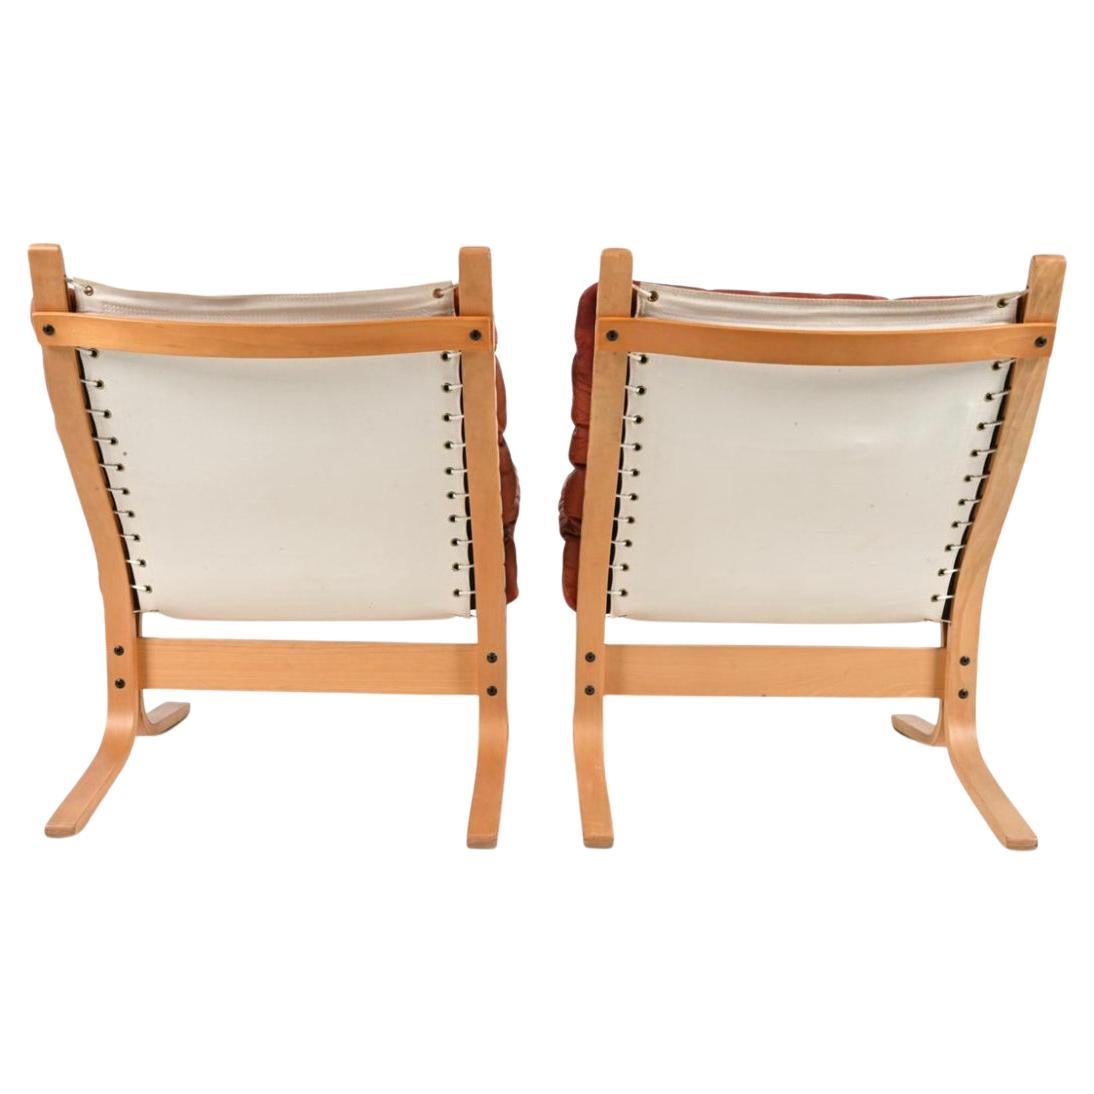 Pair of Midcentury Scandinavian Modern leather low lounge chairs by Westnofa.

(2) Westnofa Norwegian modern low Siesta chairs designed by Ingmar Relling. Blonde beech Wooden frames, beautiful red leather cushions. Bentwood frames and white cloth